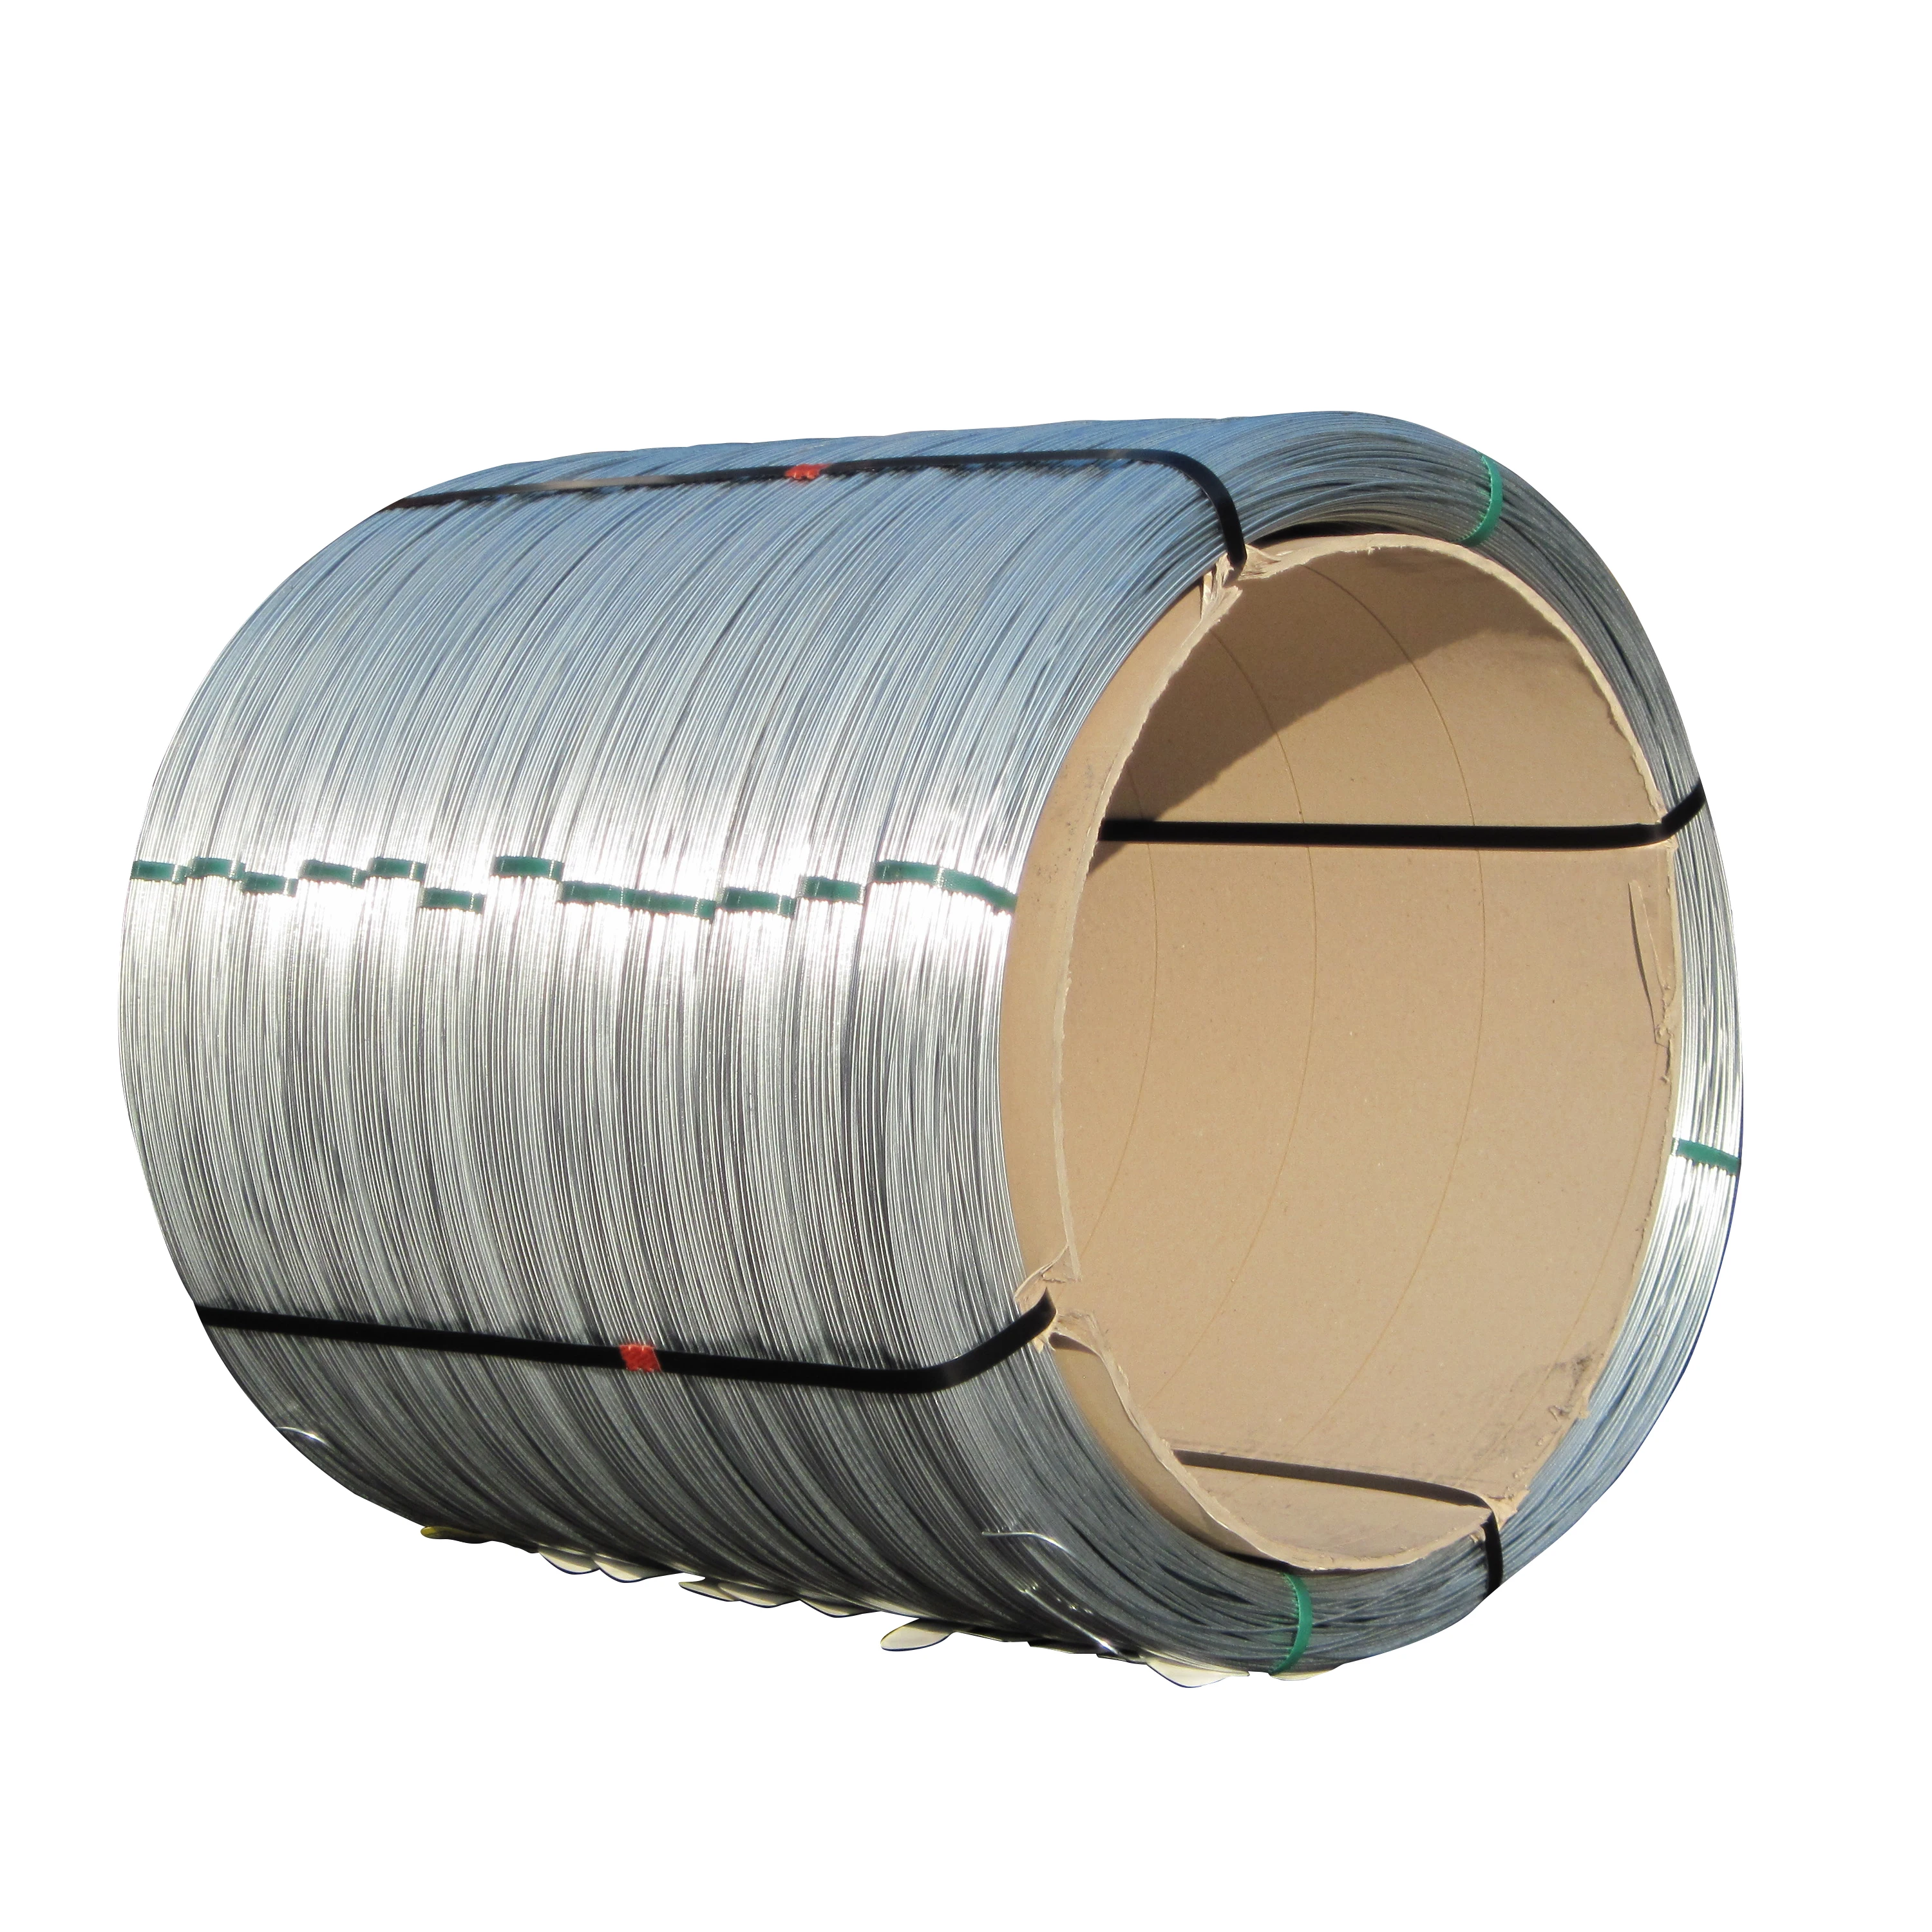 Top quality Italian zinc alu steel wire for orchards